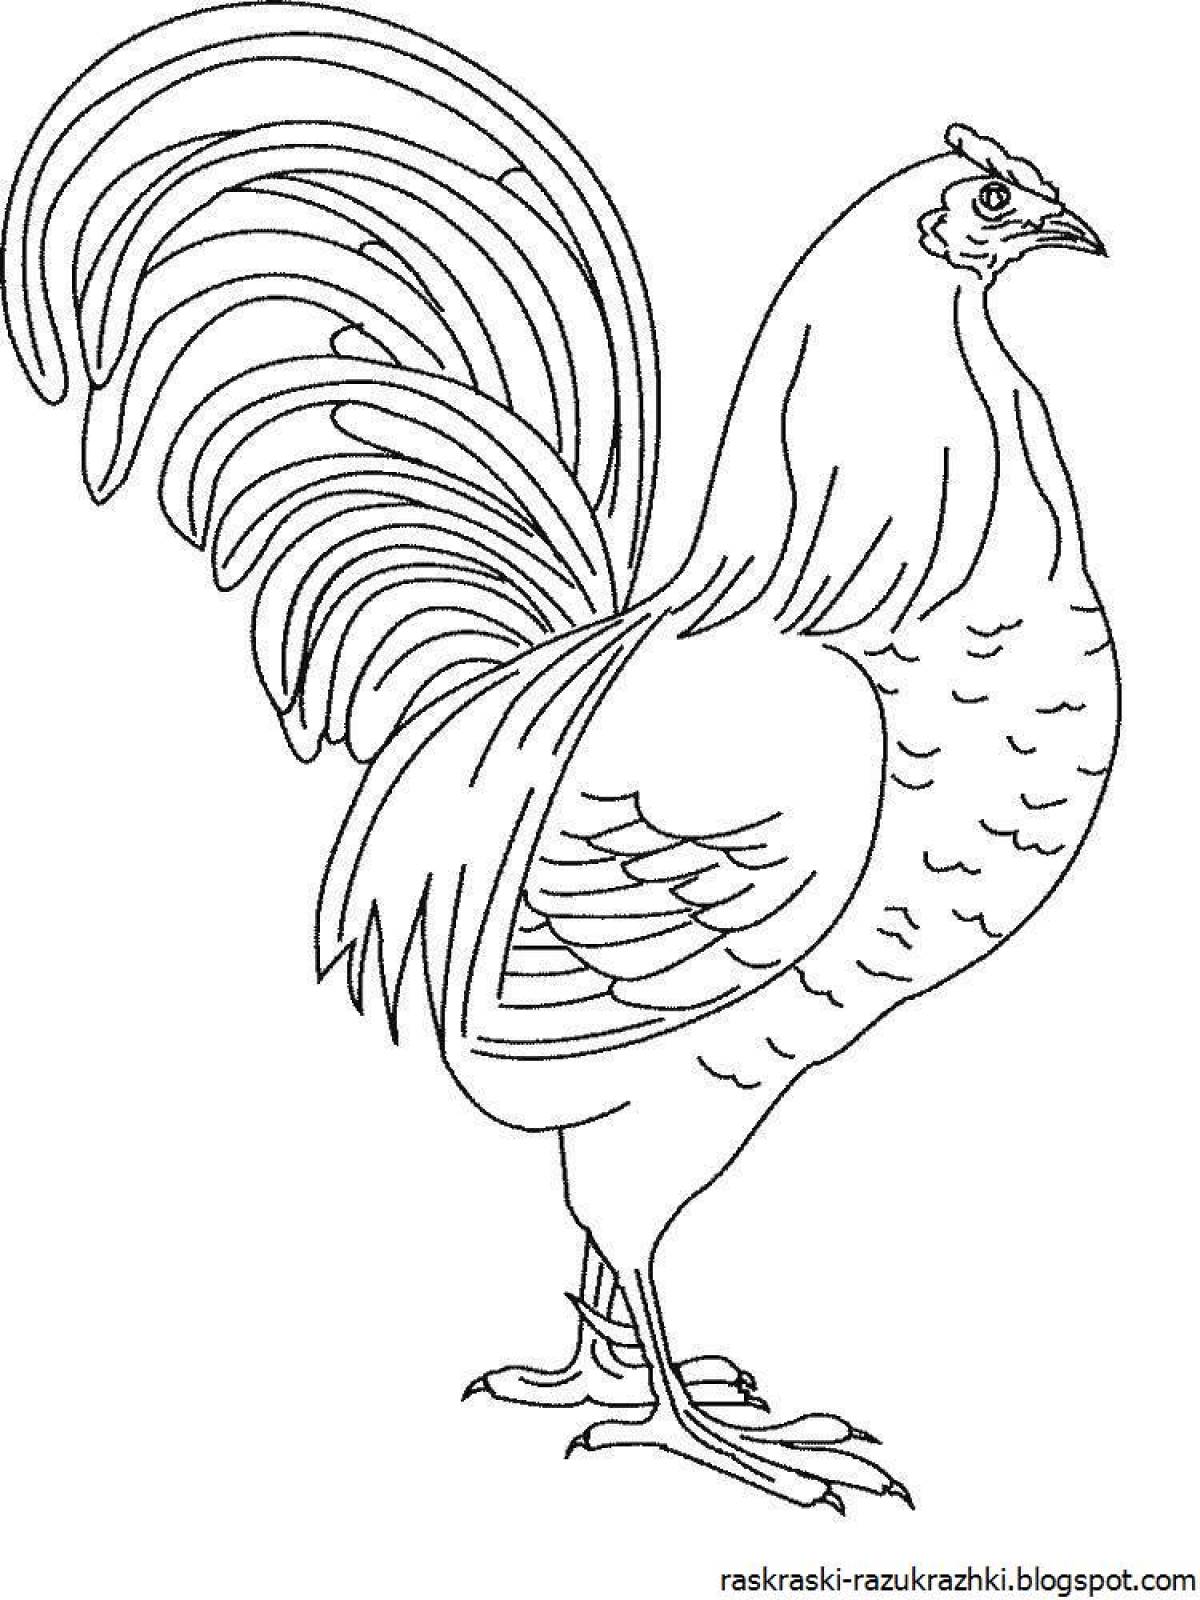 Adorable rooster coloring page